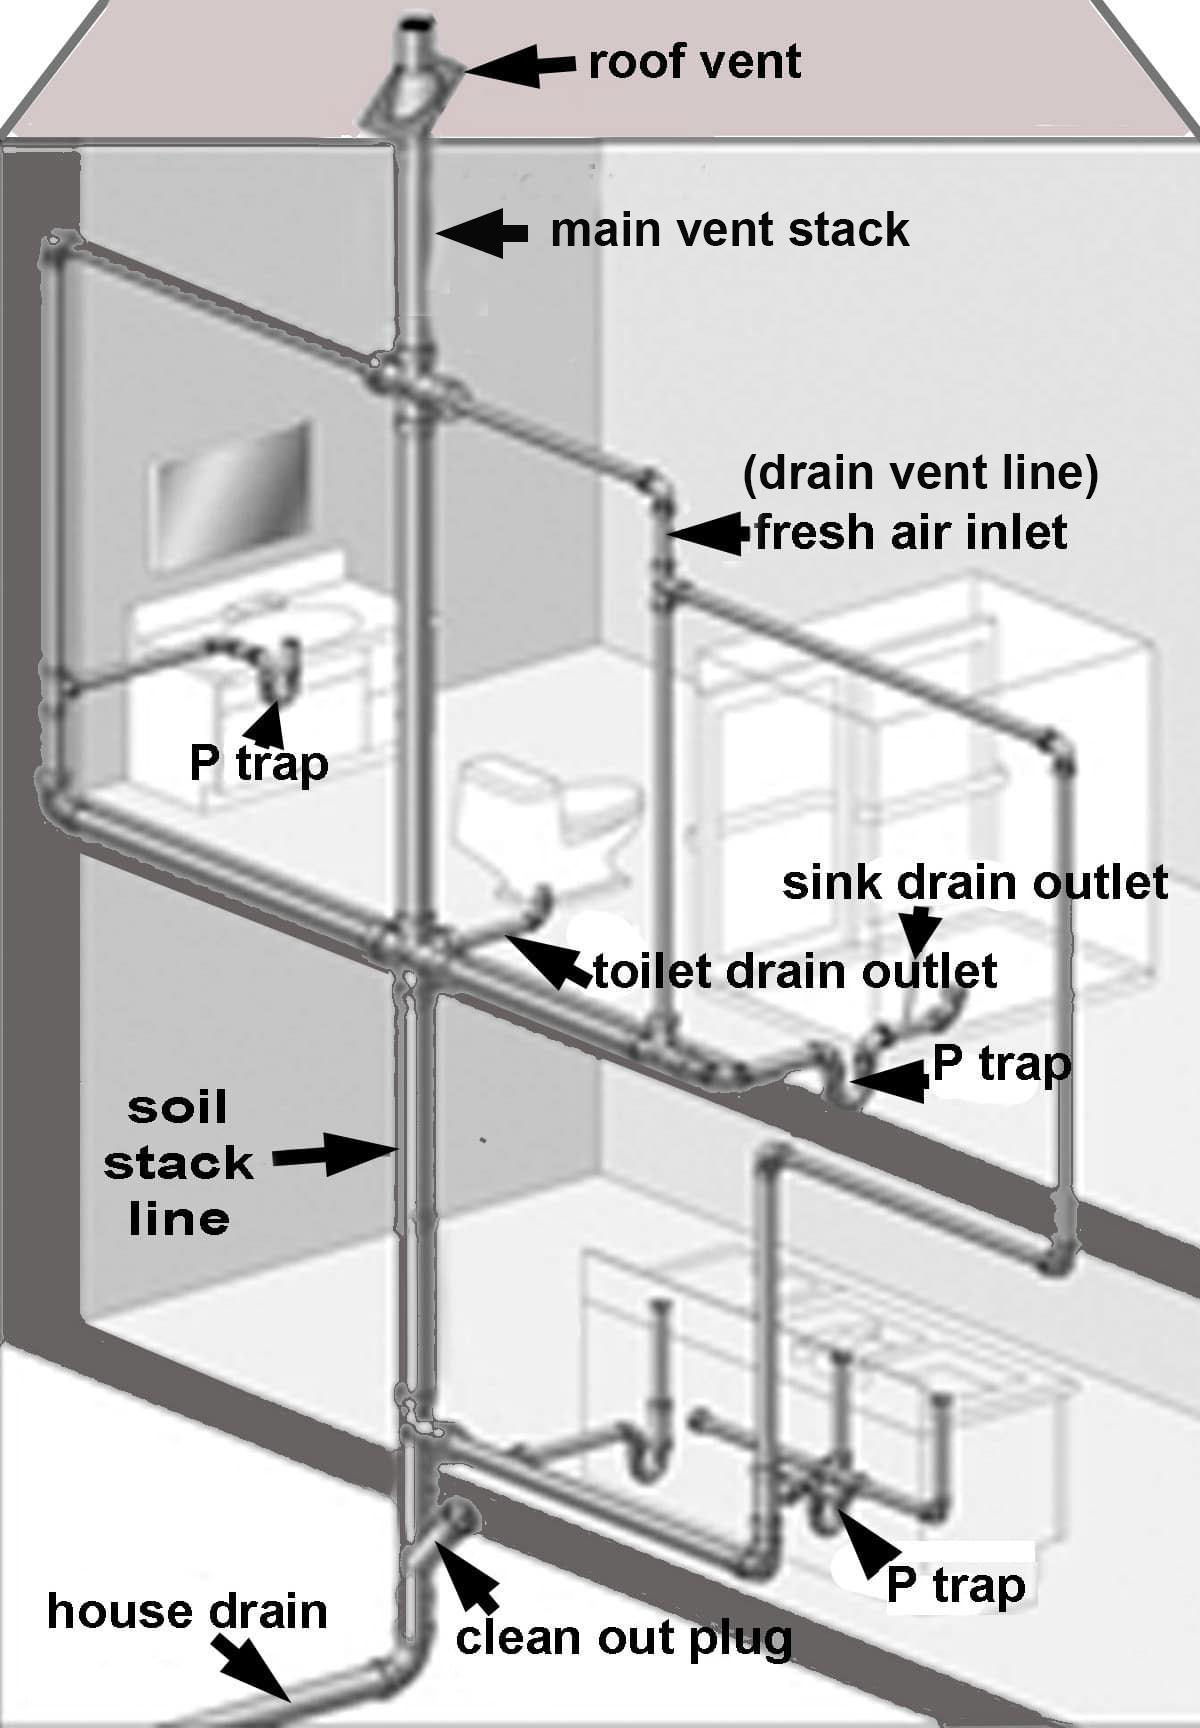 Diagram of a typical house drain and vent system.